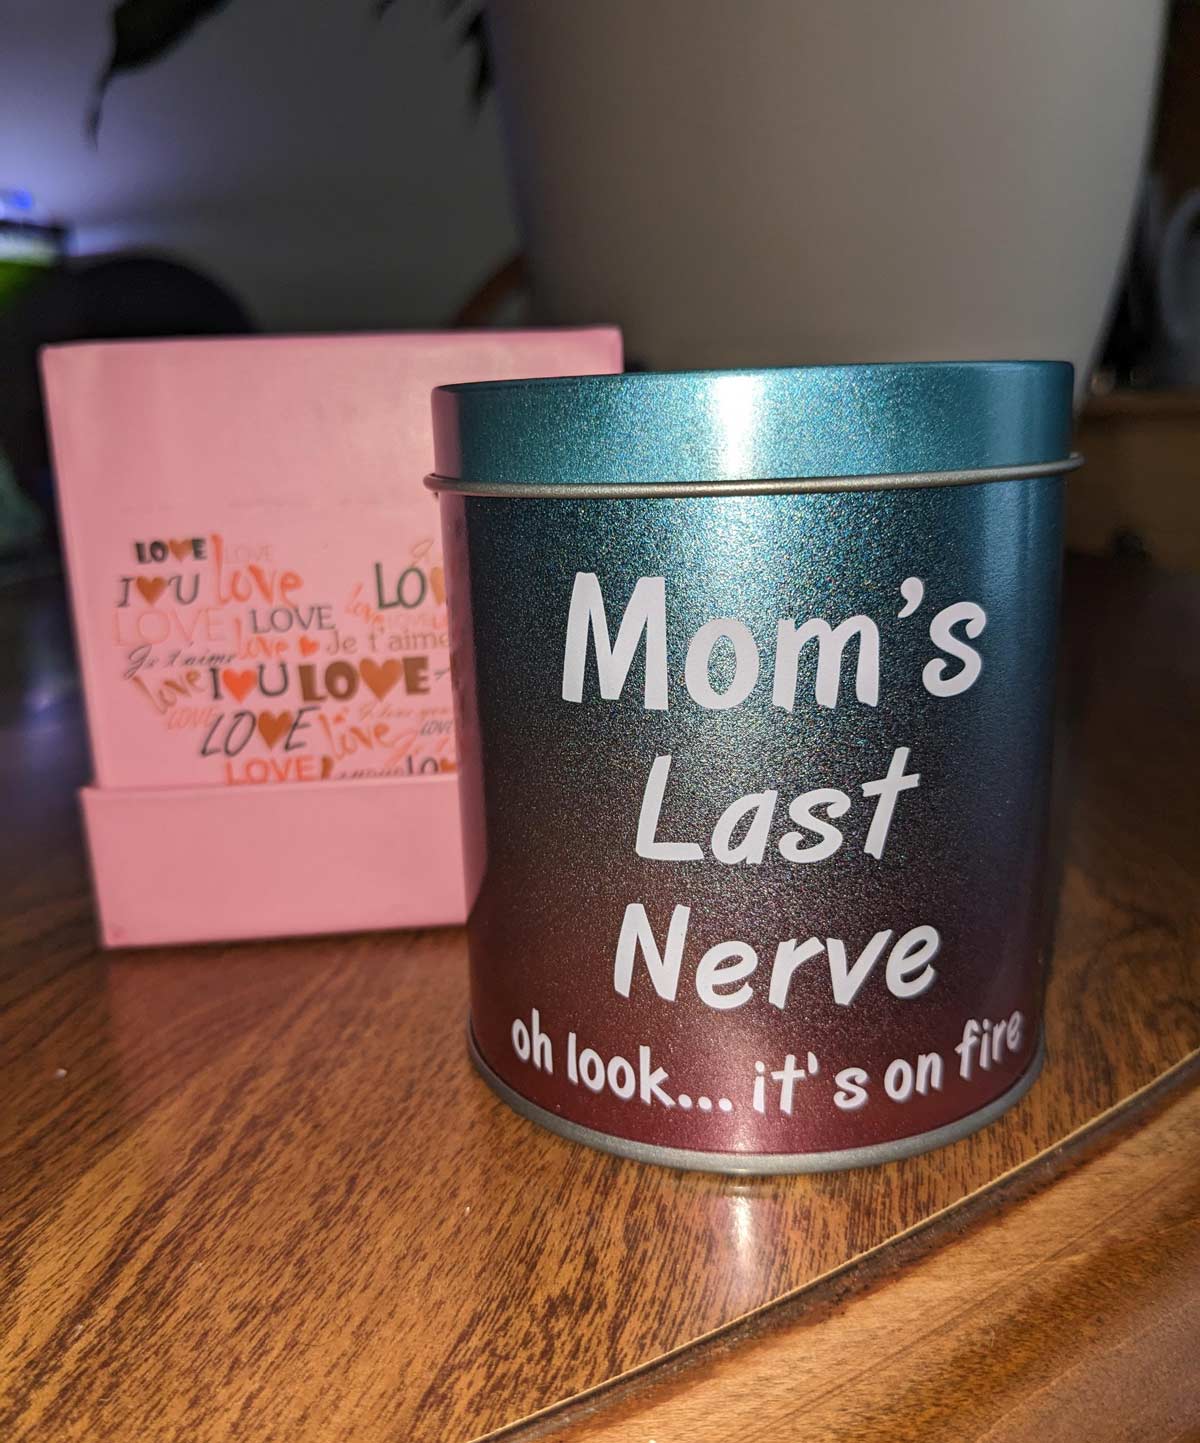 This candle I got for Mother's Day